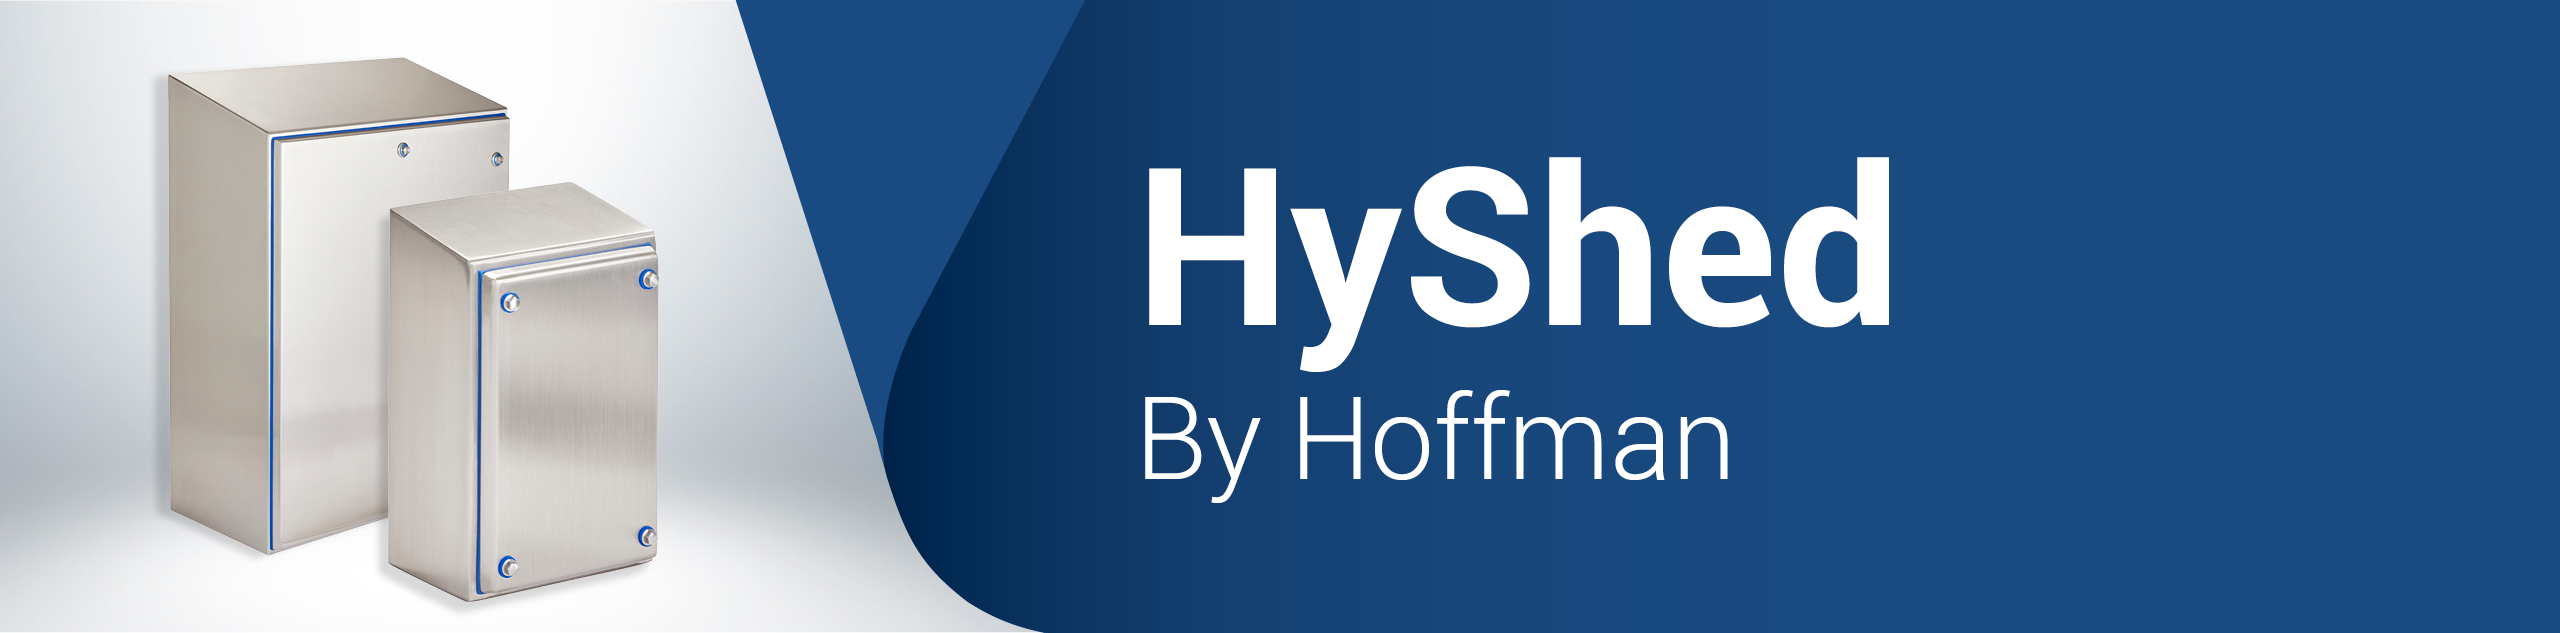 HyShed By Hoffman